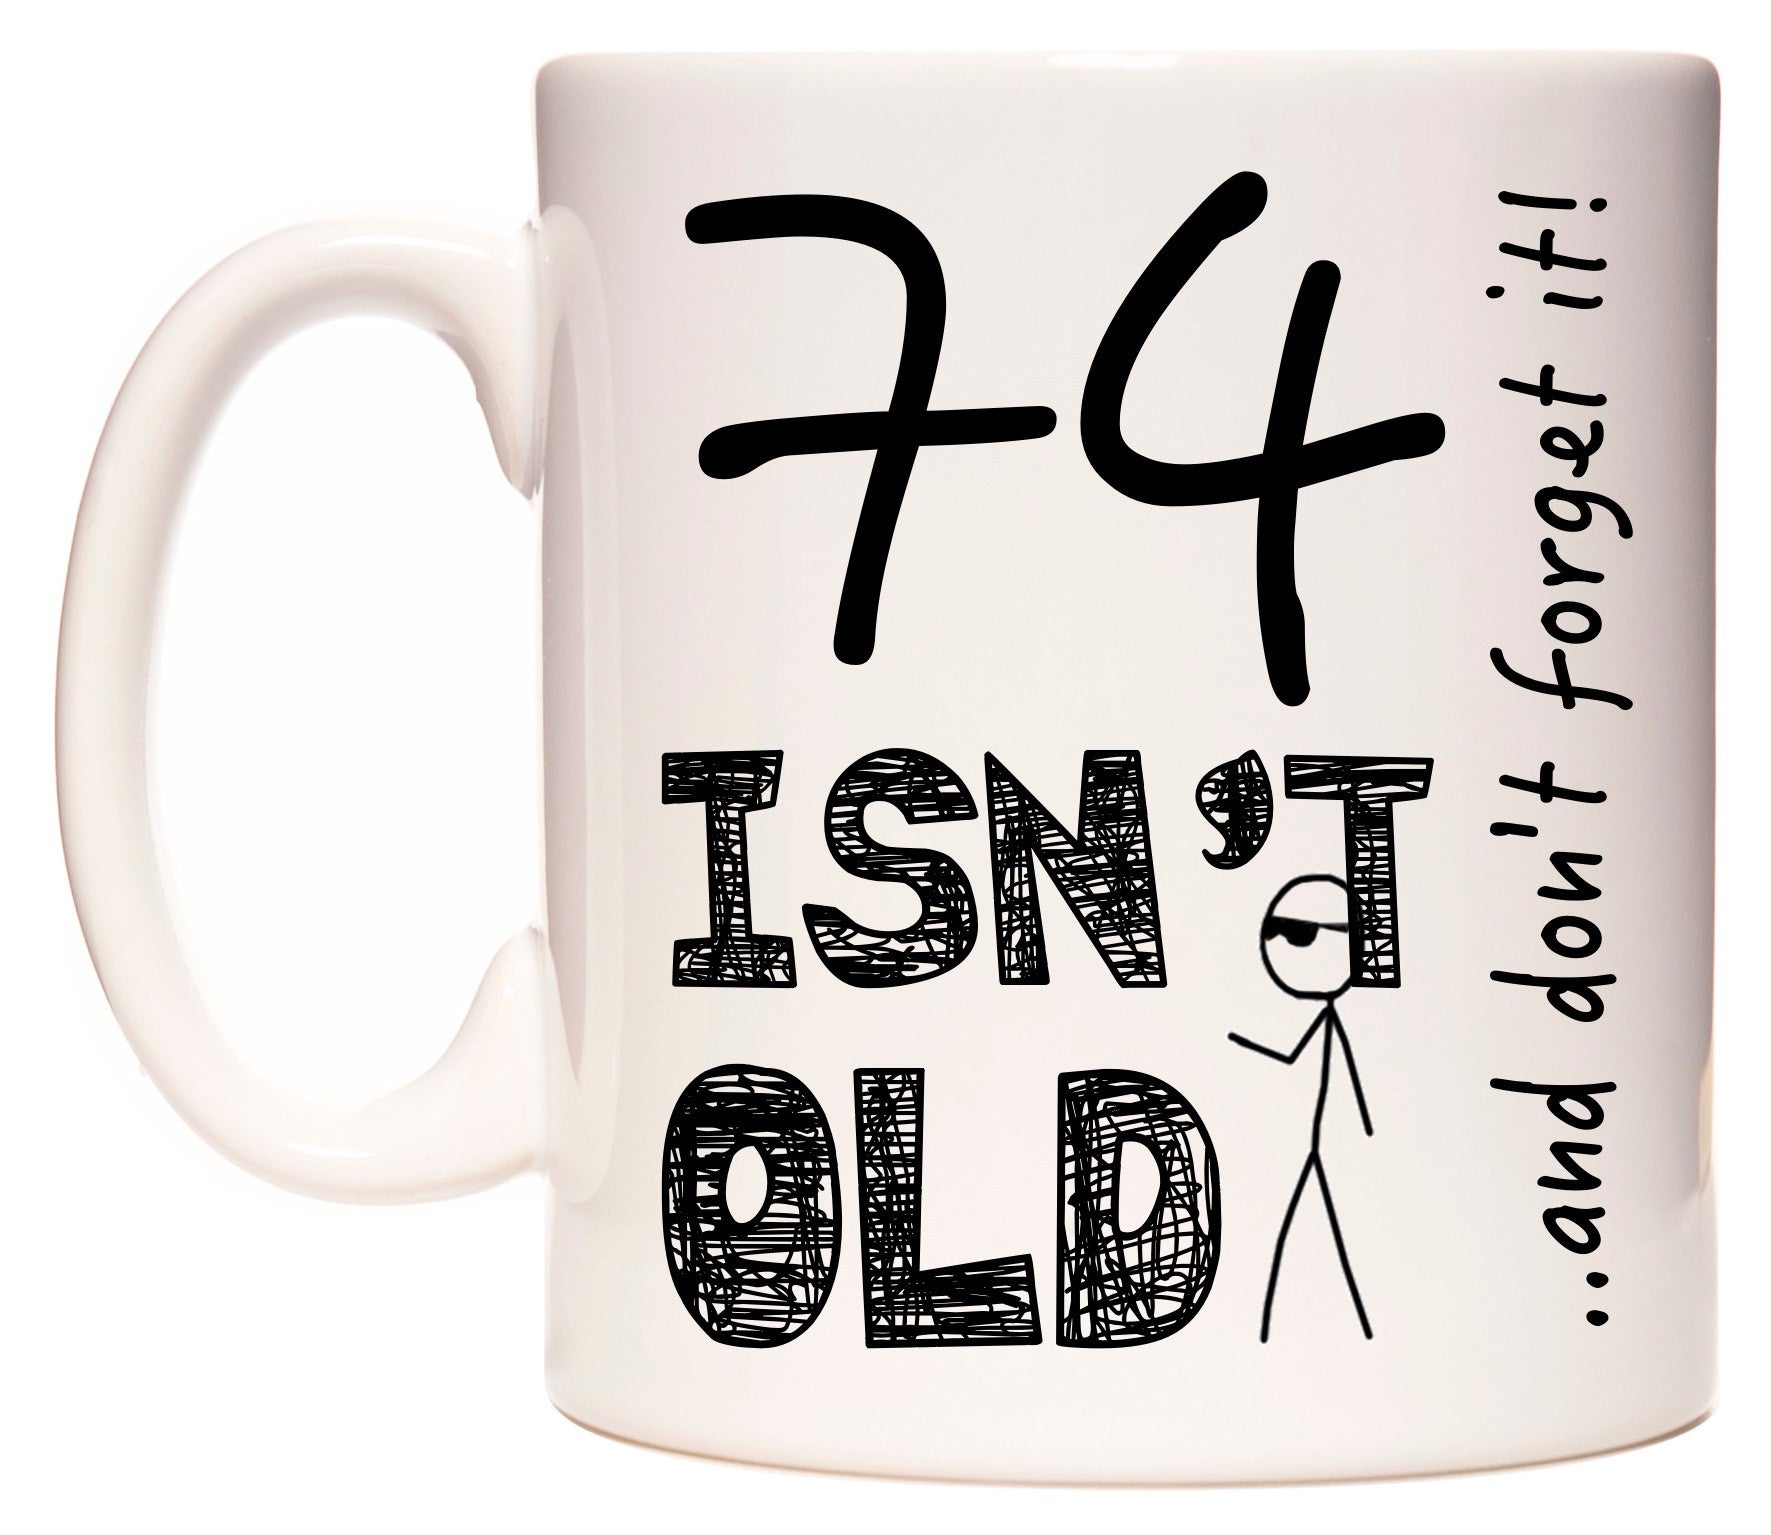 This mug features 74 Isn't Old